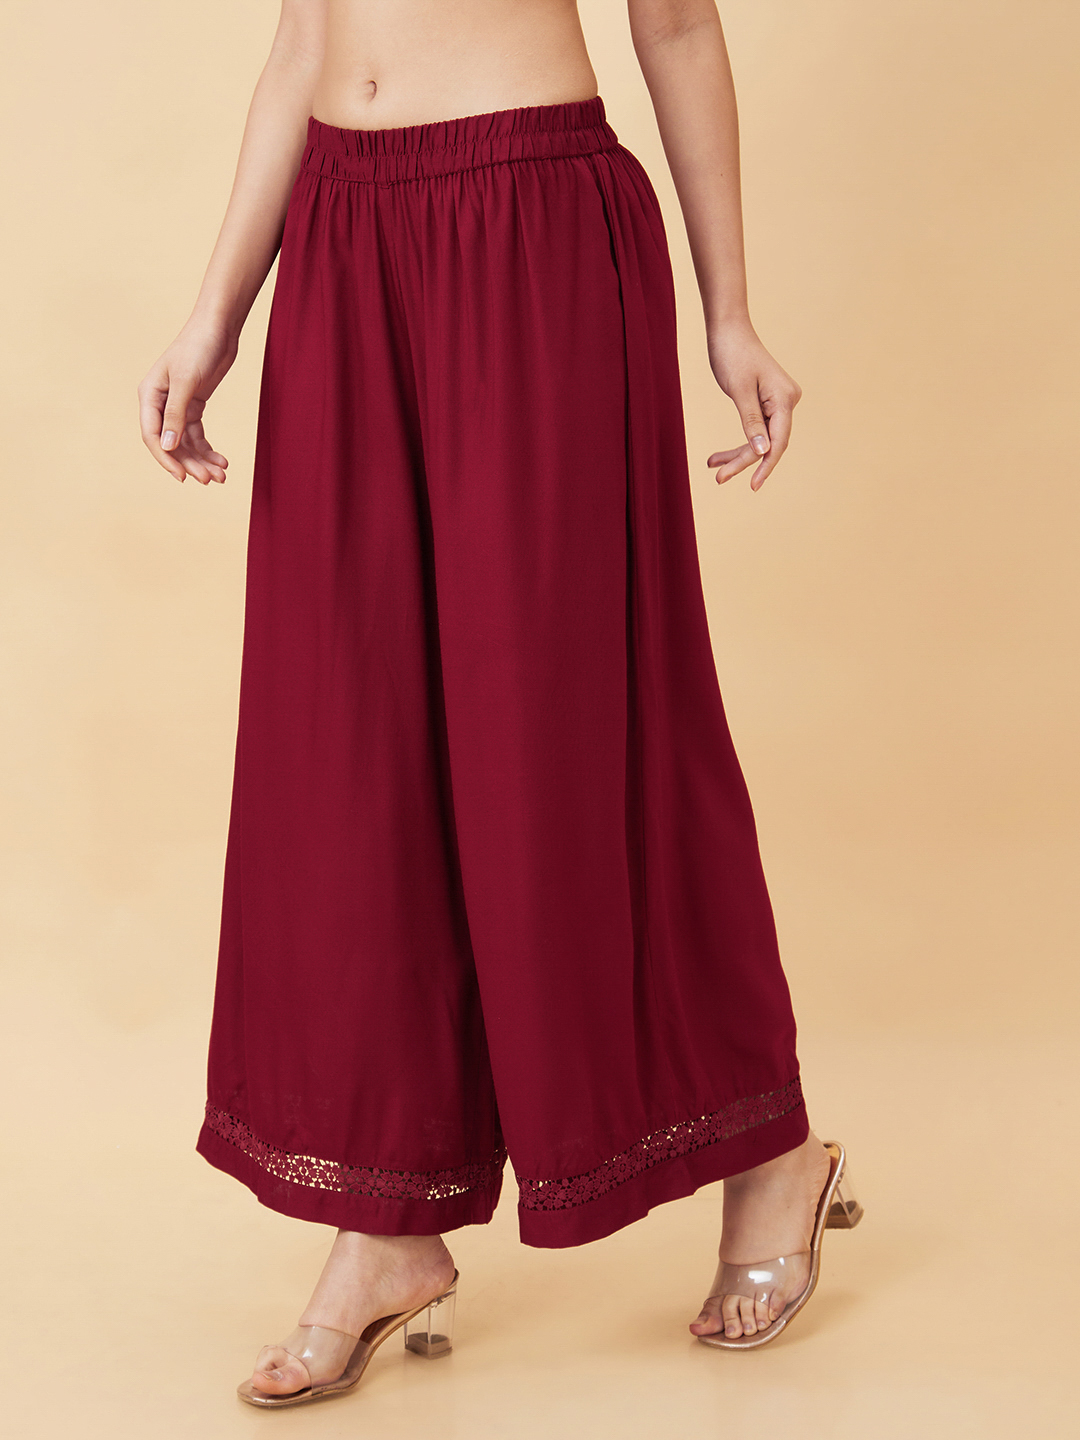 Globus Women Maroon Solid Ethnic Wide Leg Palazzo with Lace at Hem